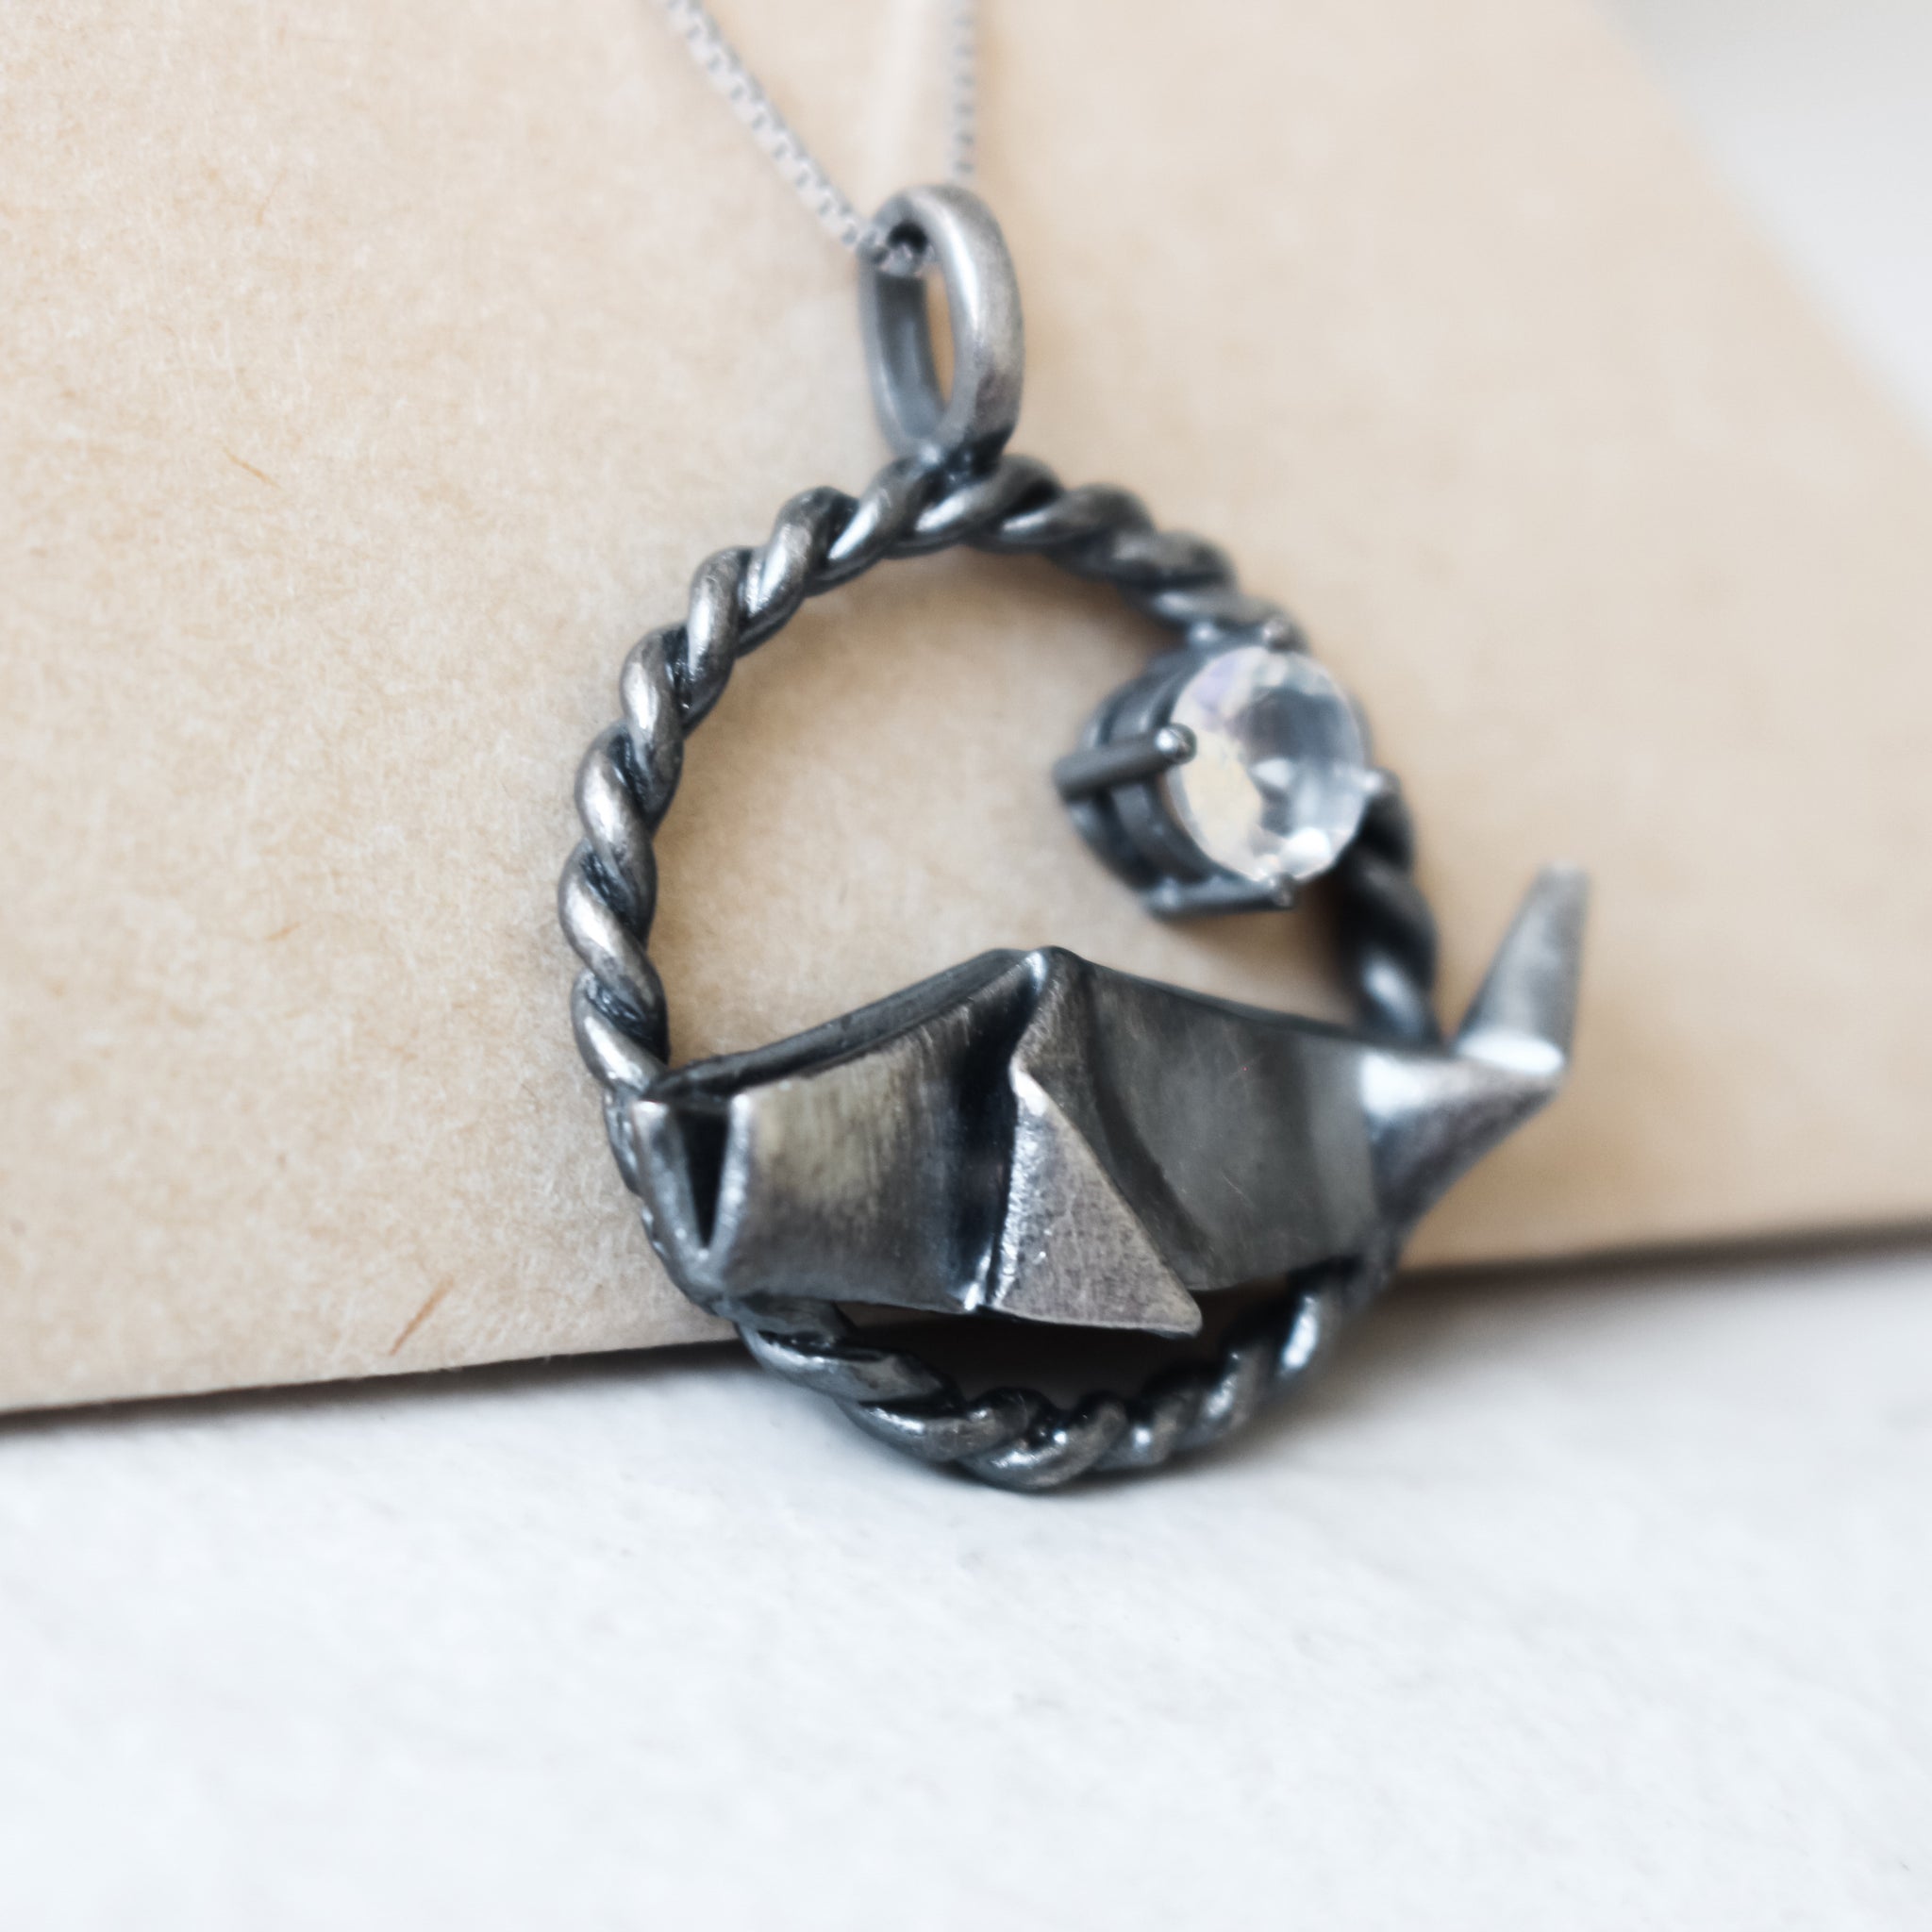 925 Black Silver Origami Whale with Moonstone Necklace